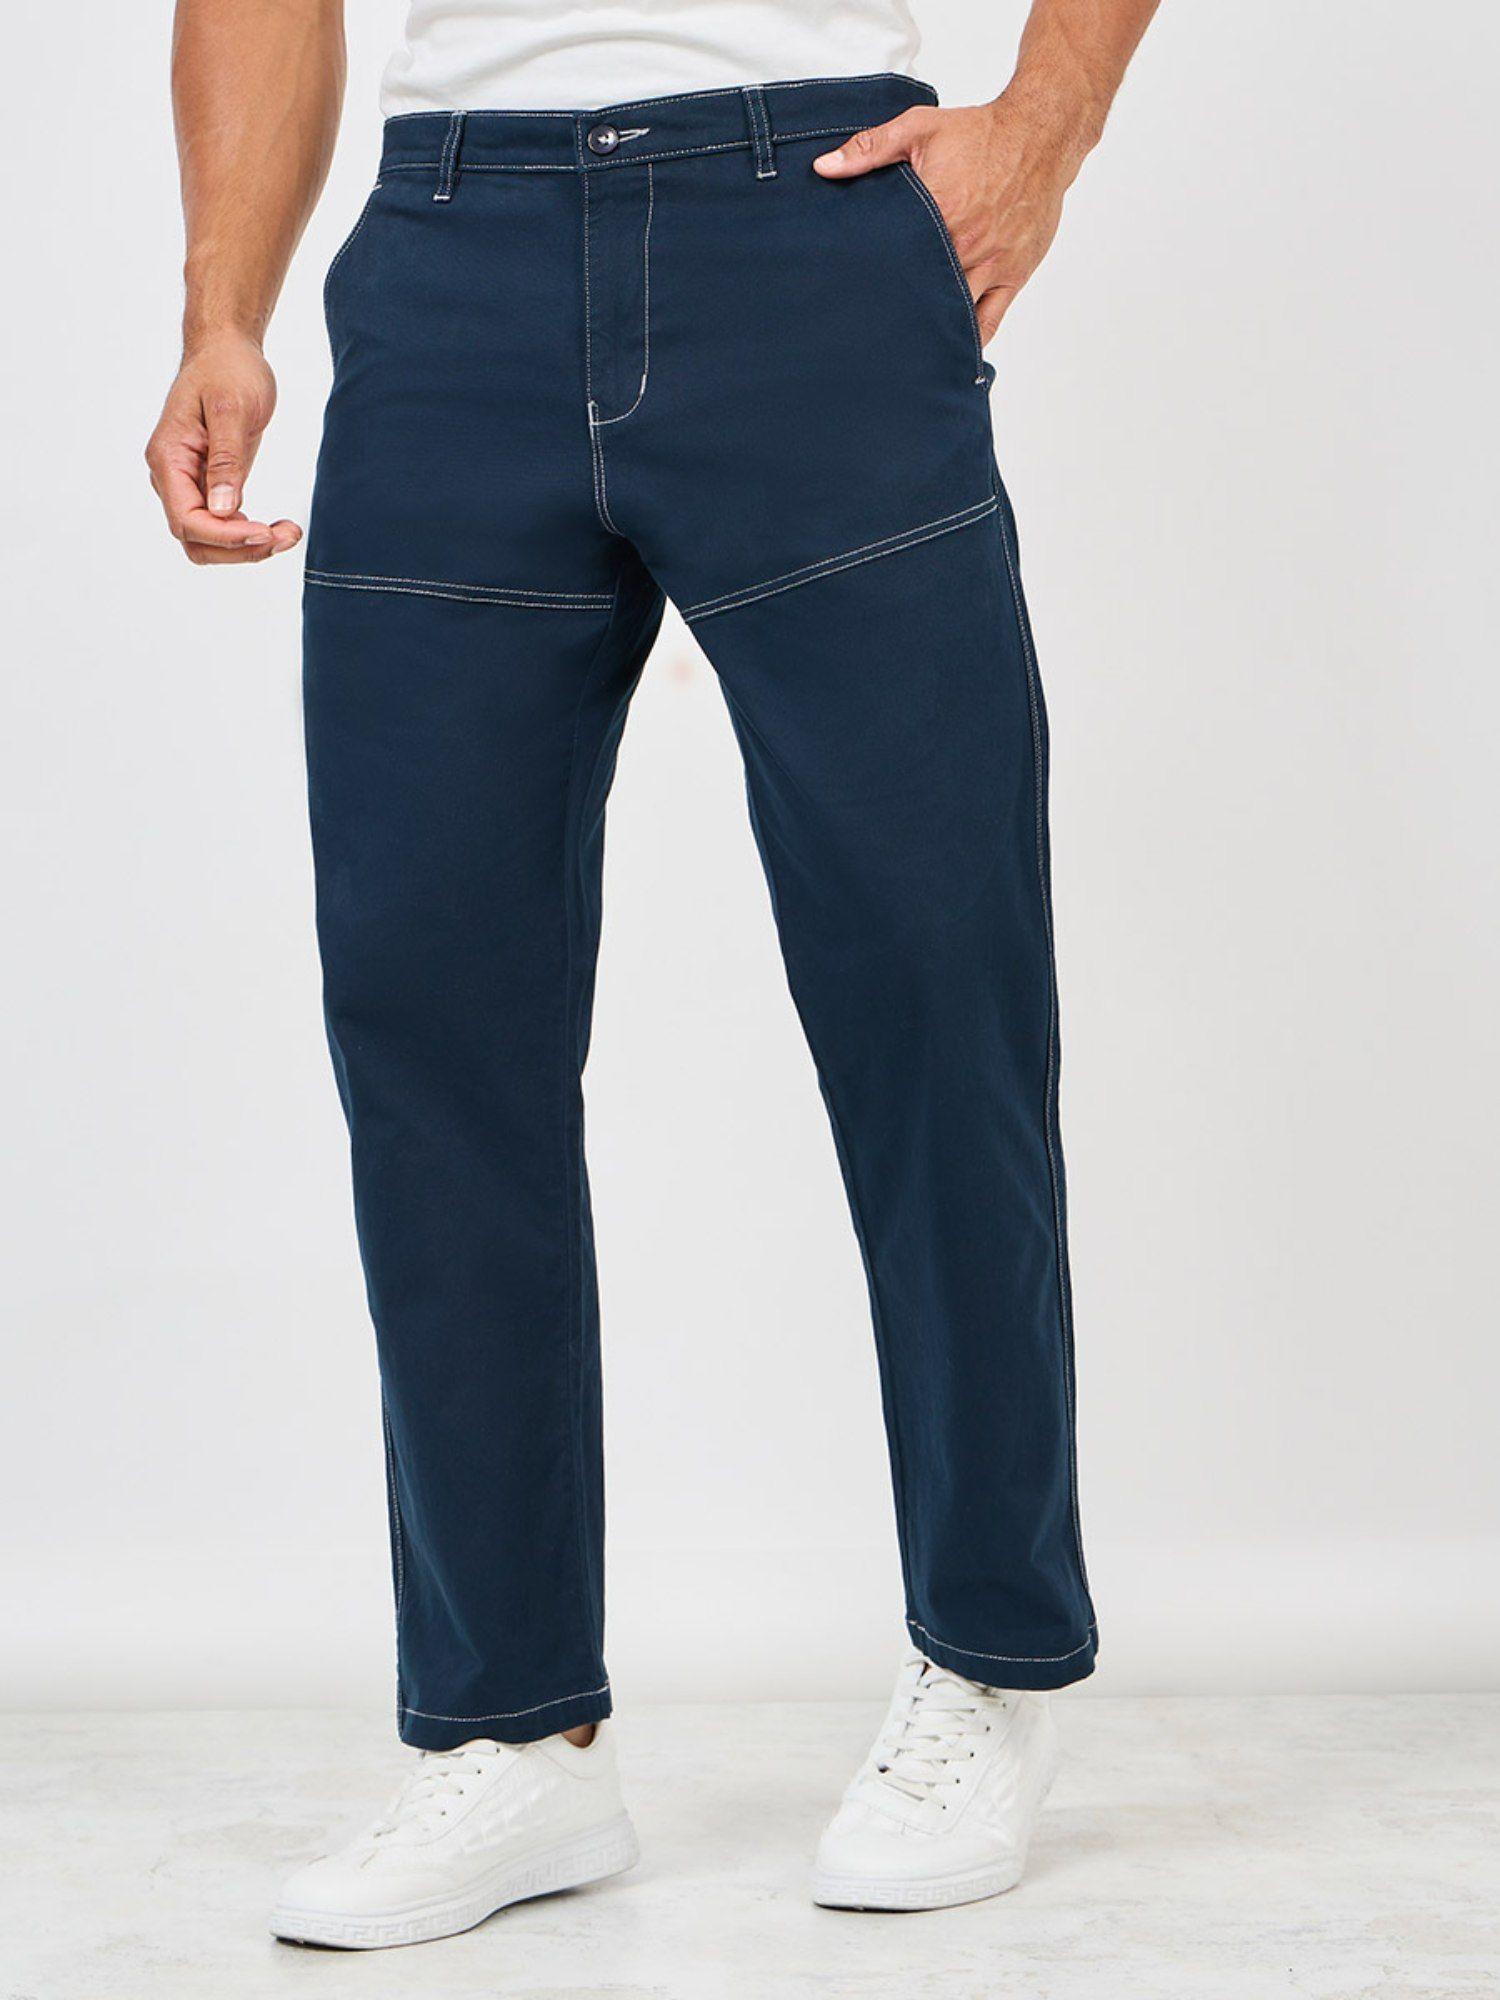 men's navy blue contrast stitch relaxed fit cotton chinos